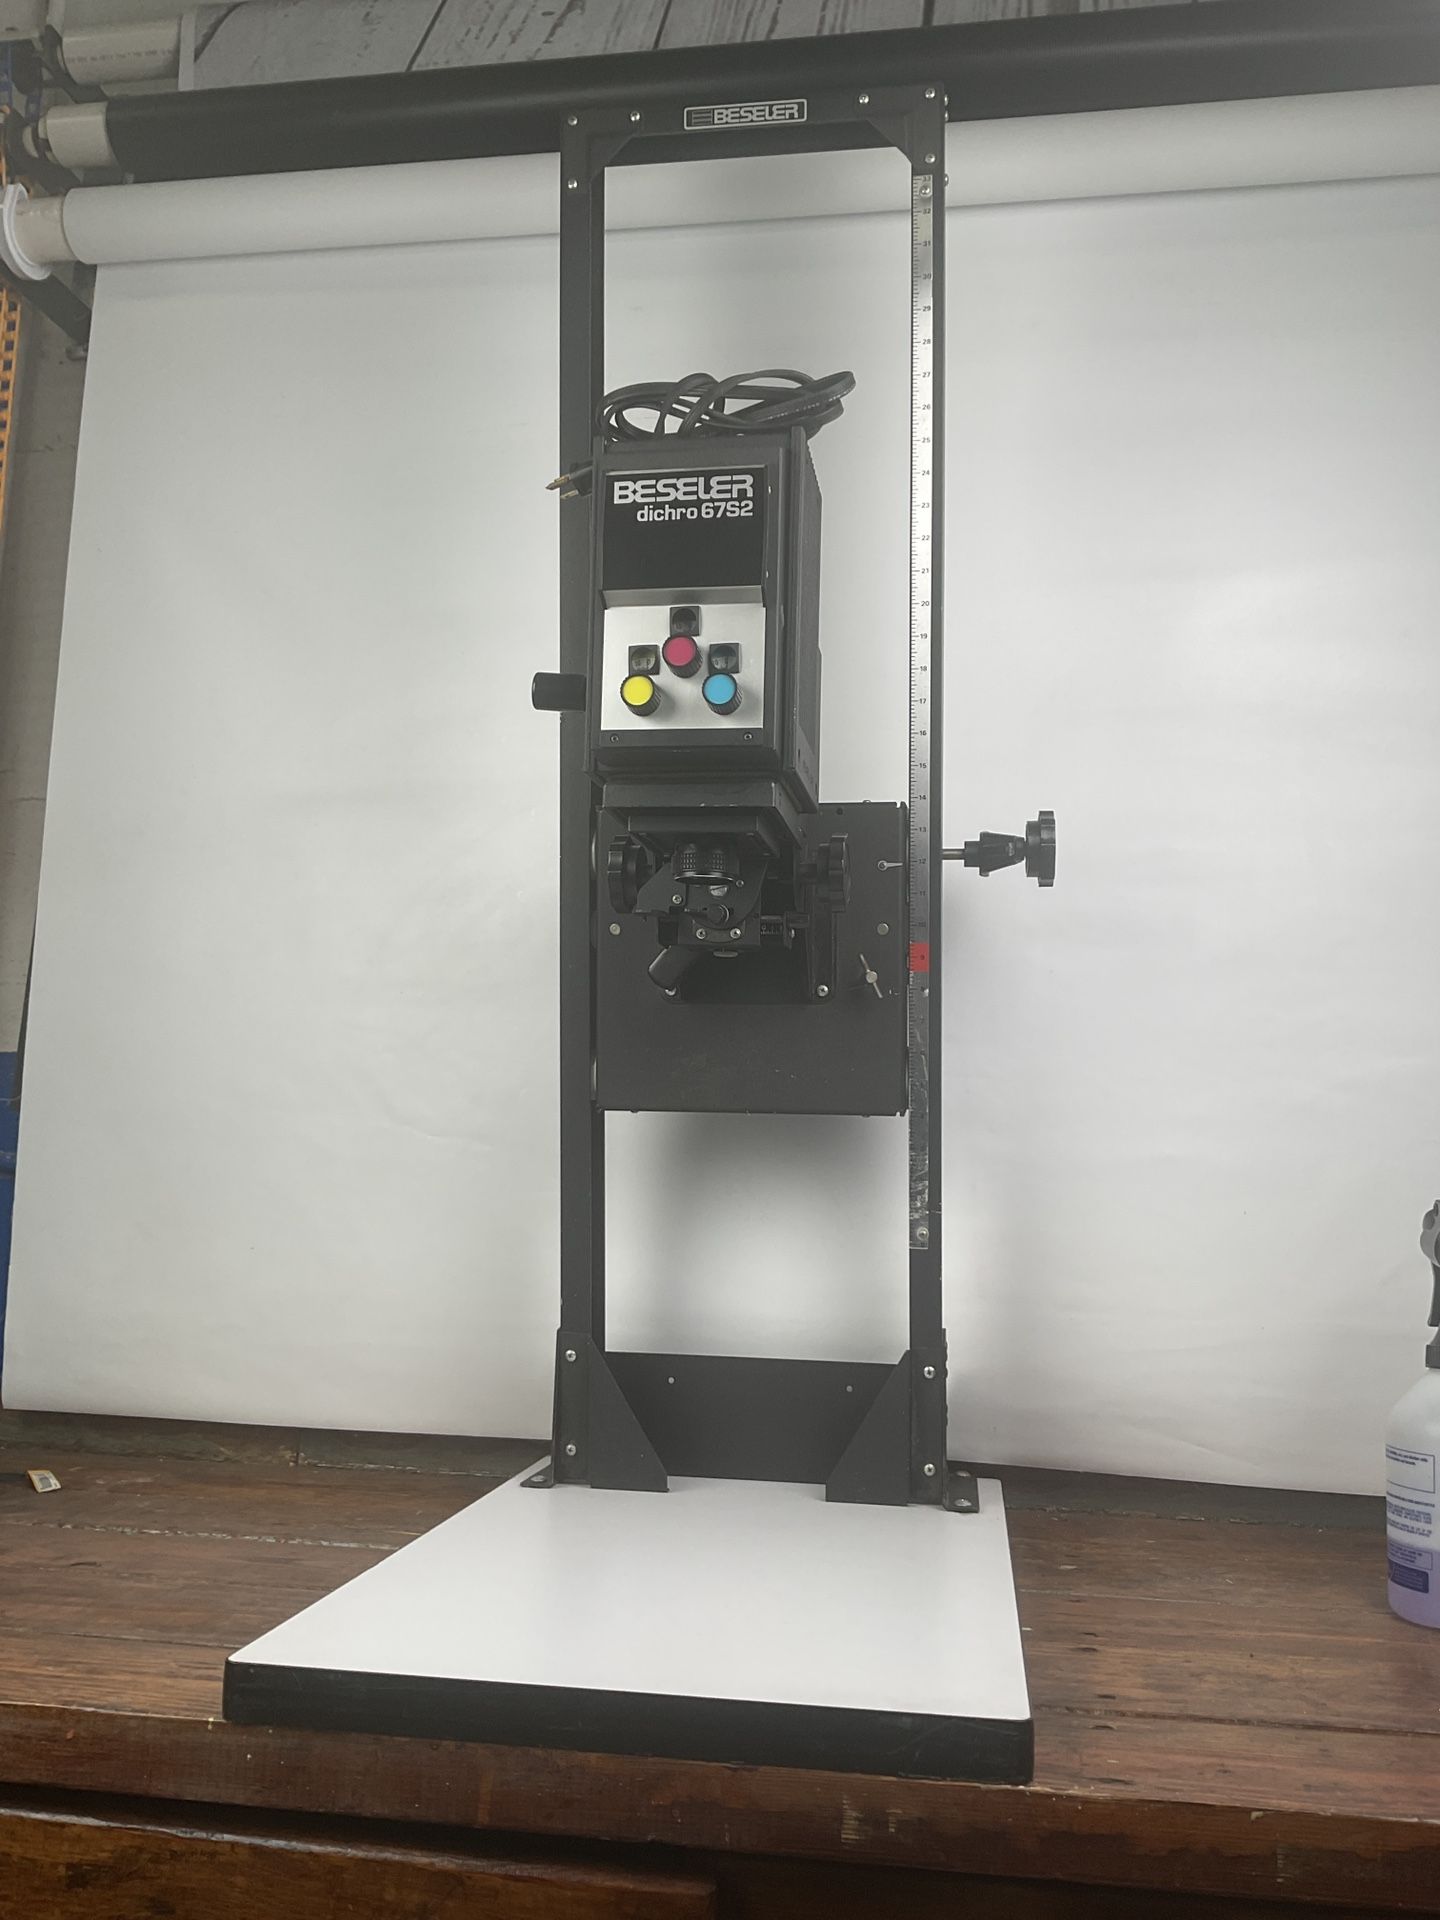 Beseler 67S2 Dichro Colored Photo Enlarger - Photography Film Equipment 🚚